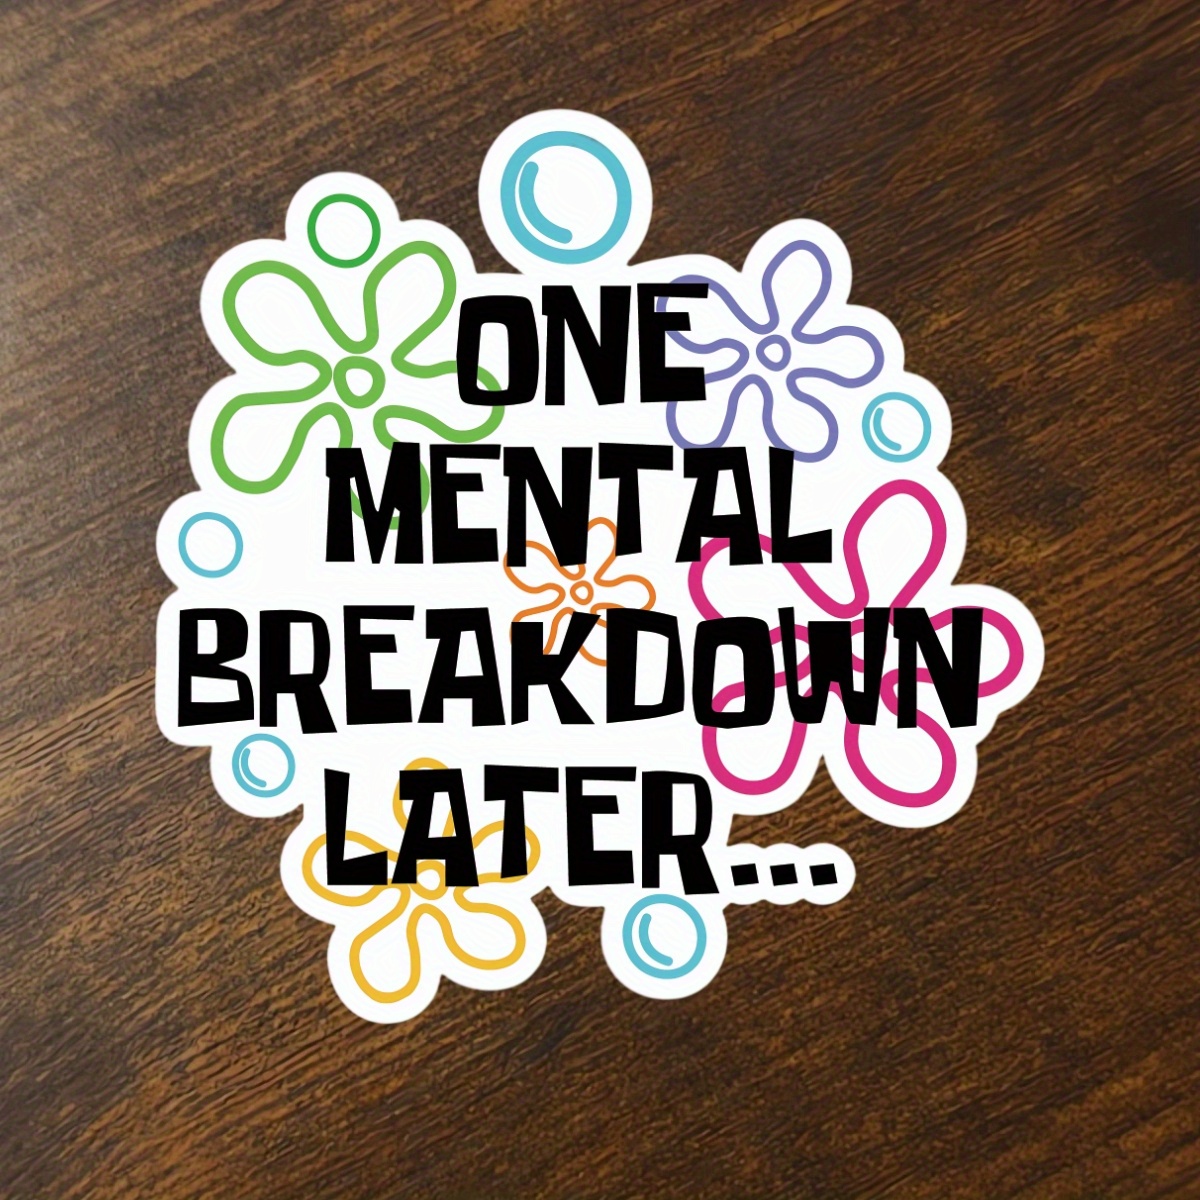 

1 Mental Breakdown Later Vinyl Bumper Sticker - Weatherproof & Durable Decal For Water Bottles, Tumblers, Cars, Anxiety Awareness & Mental Health Support